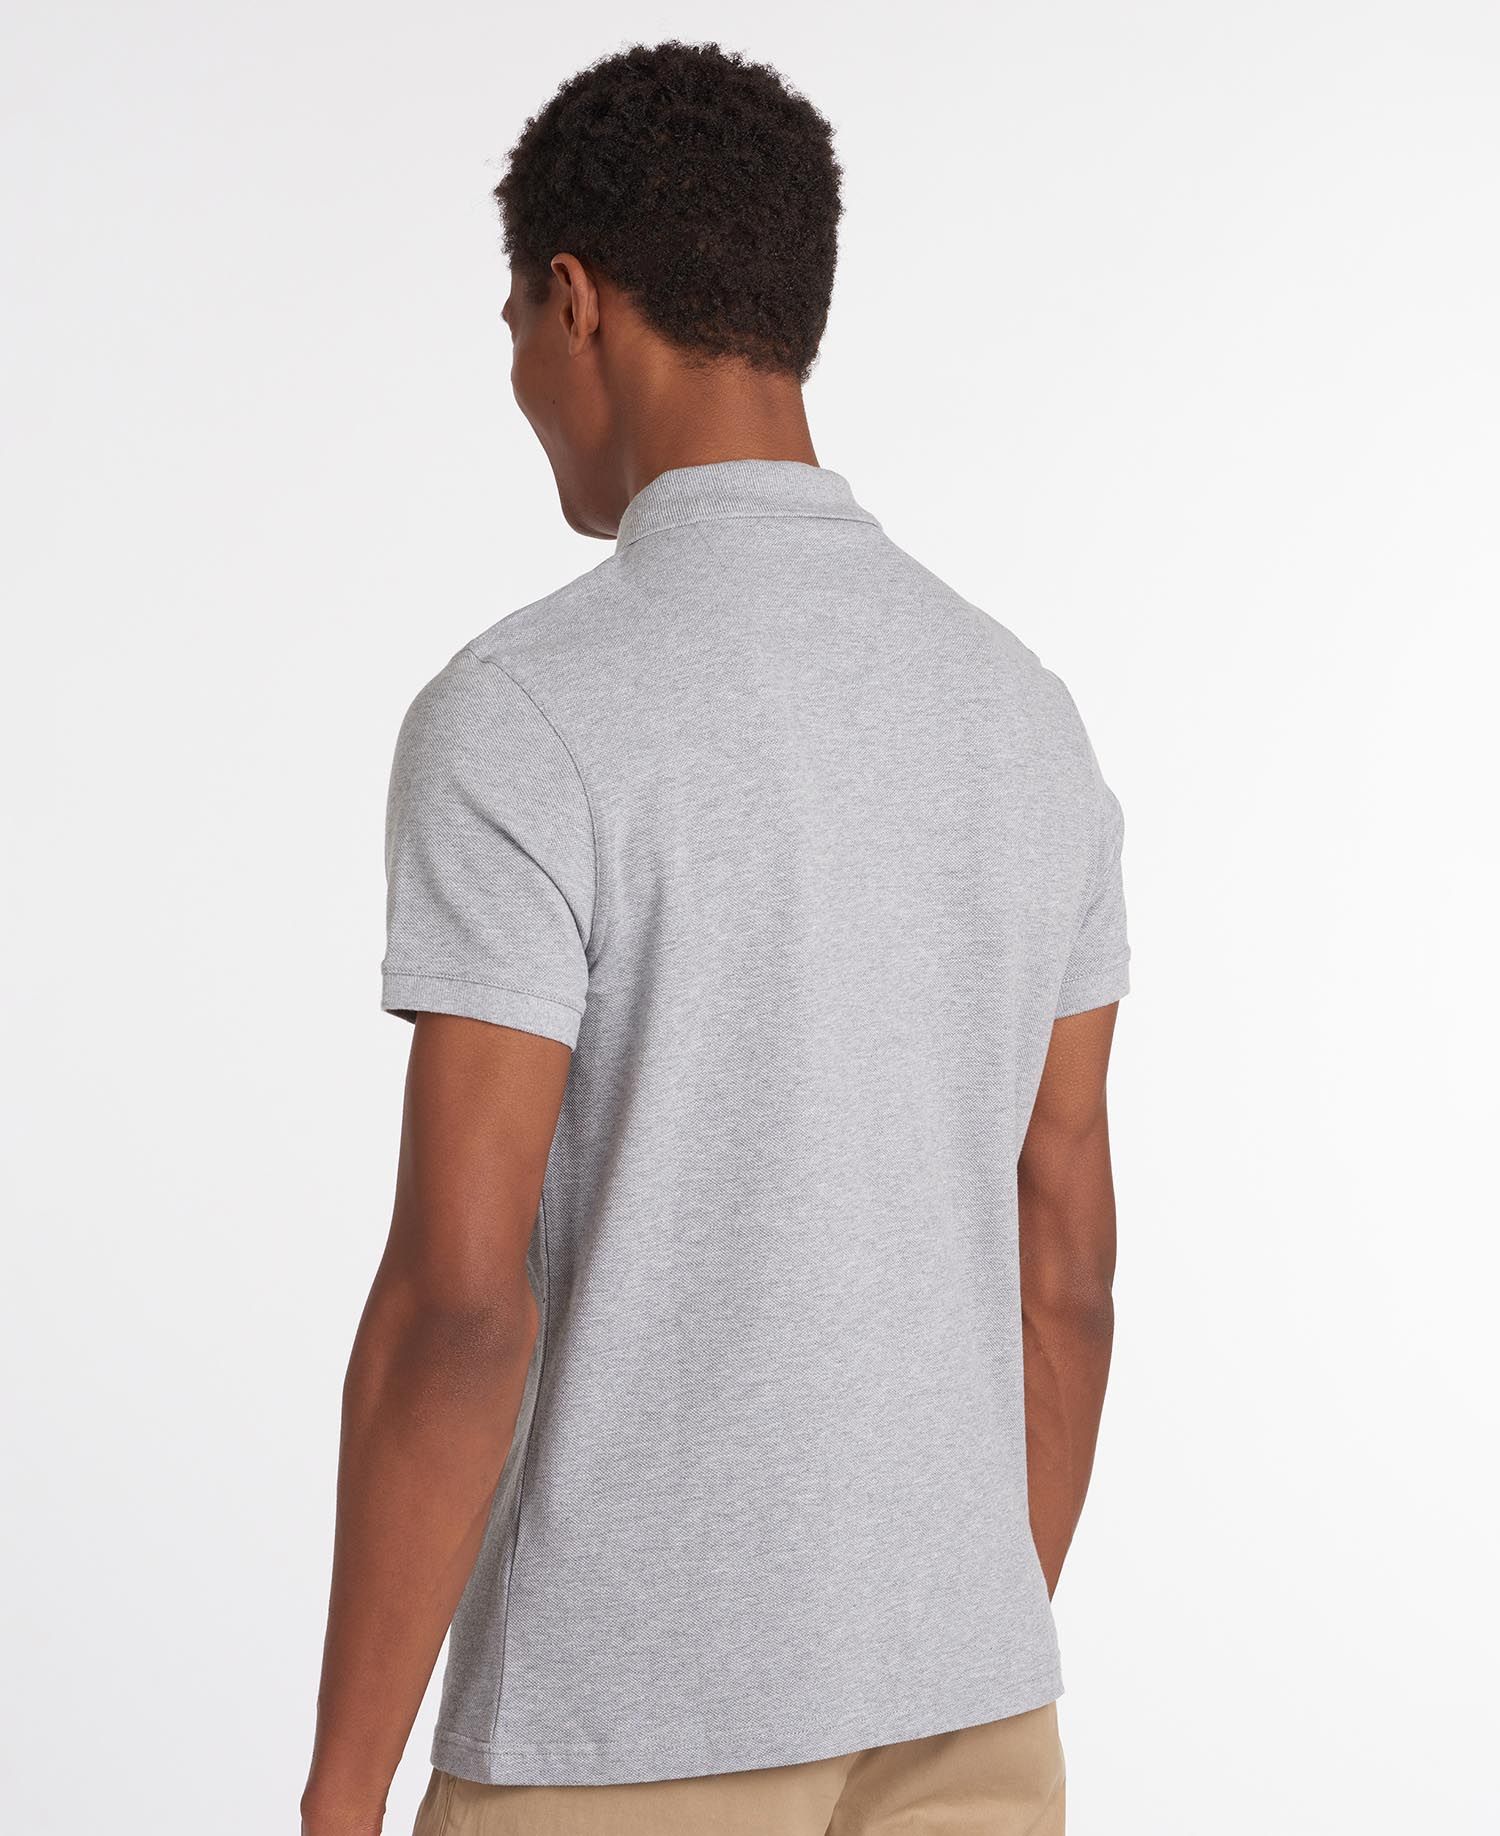 Barbour Sports Polo in Grey | Barbour